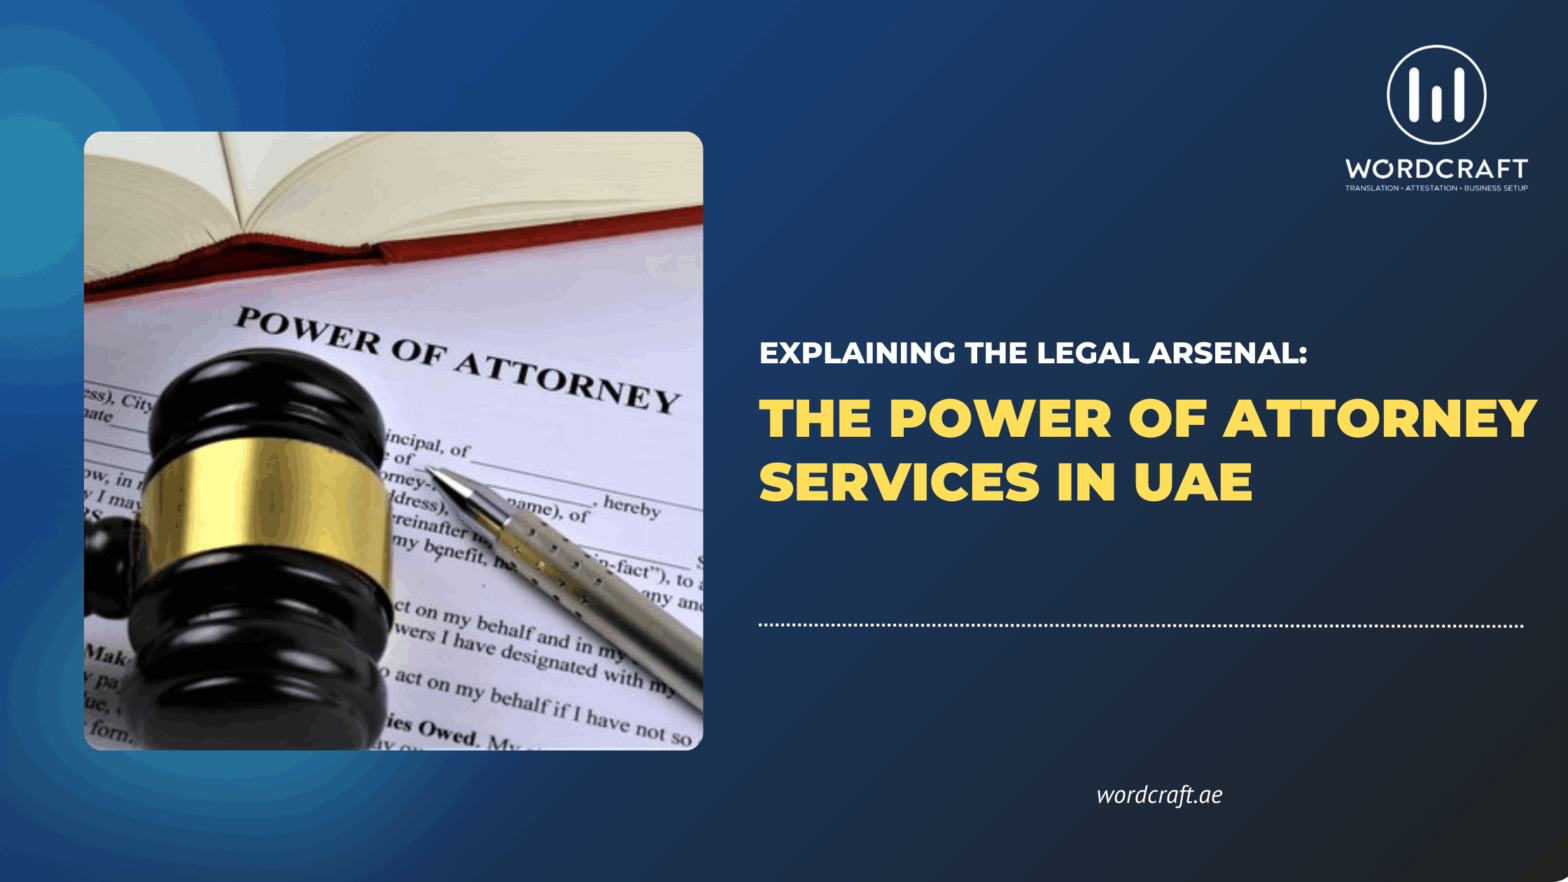 power of attorney services in uae